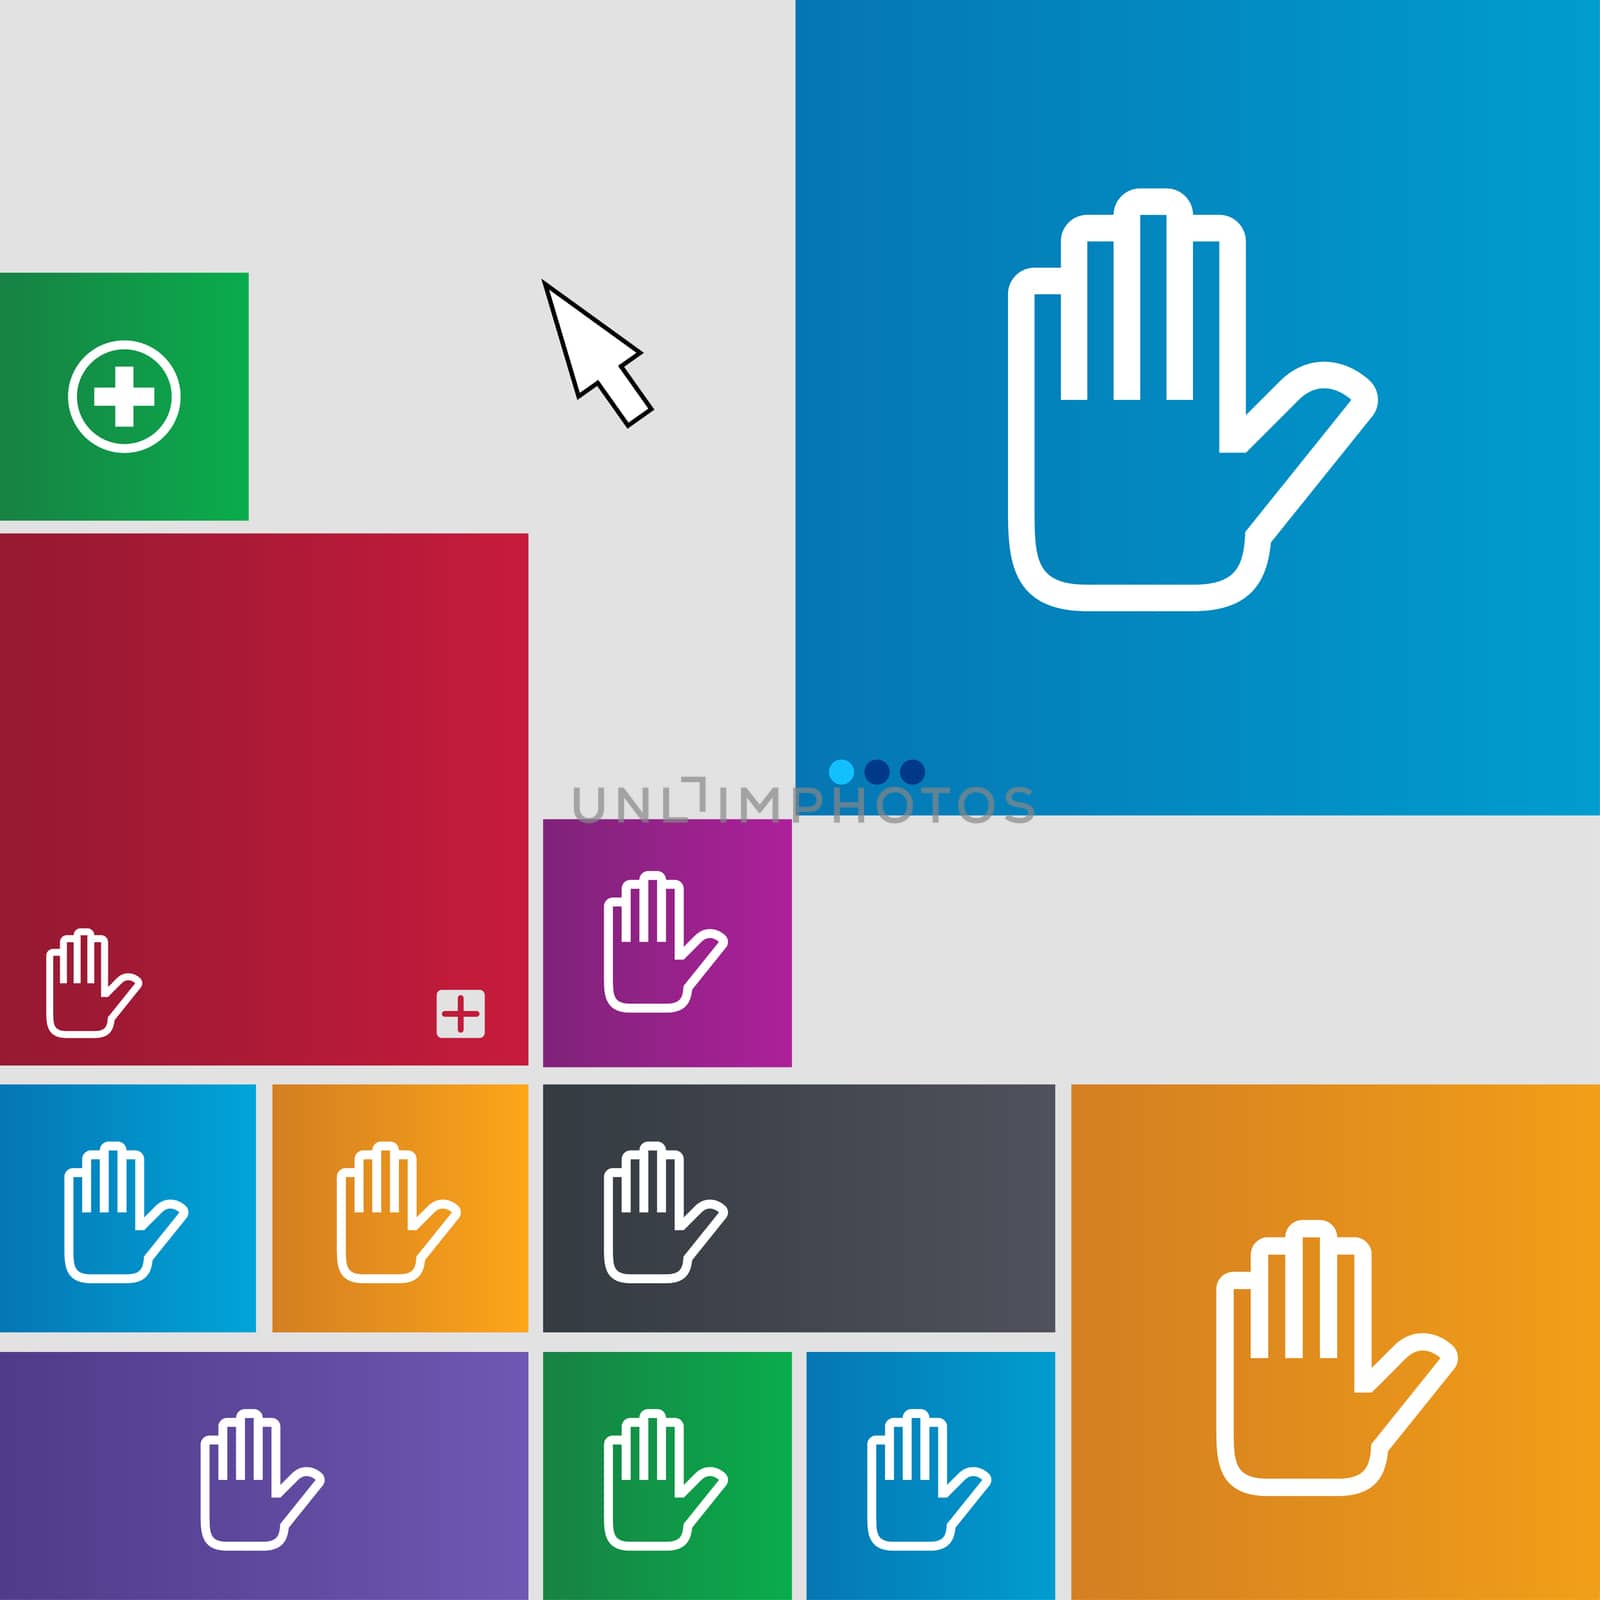 Hand print, Stop icon sign. Metro style buttons. Modern interface website buttons with cursor pointer. illustration